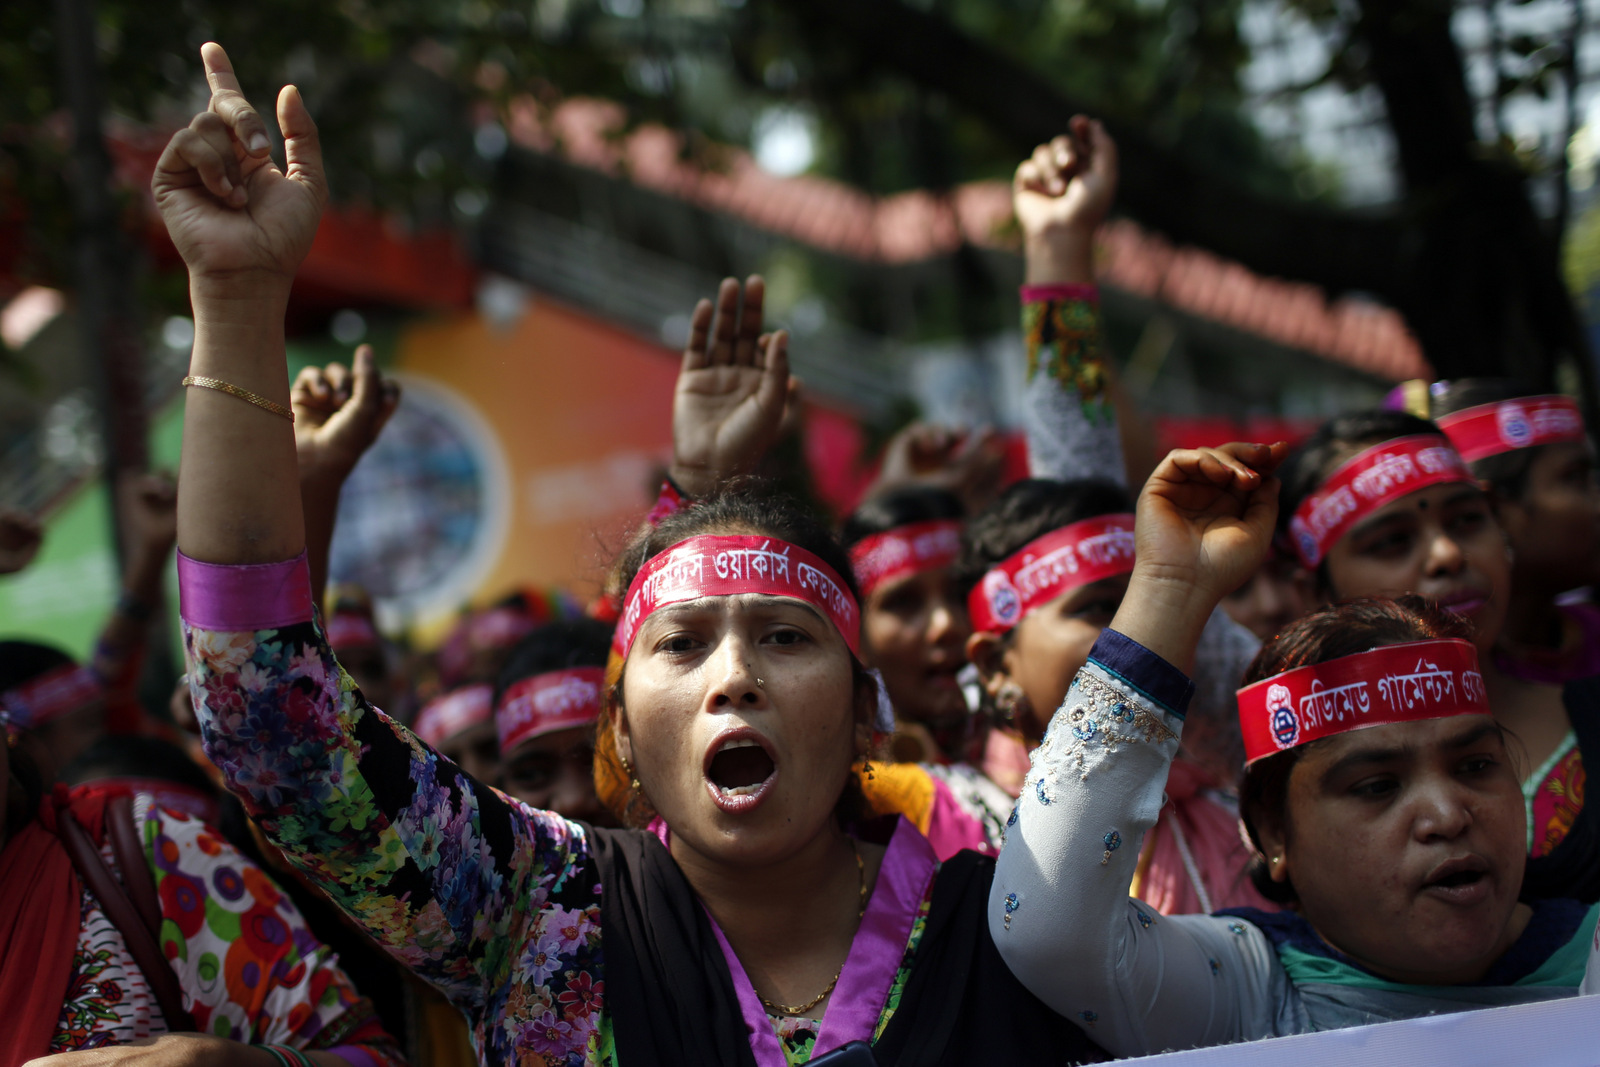 Bangladeshi garment workers shout slogans as they participate in a May Day rally in Dhaka, Bangladesh, Monday, May 1, 2017. Thousands of workers and activists marched during International Workers Day demanding higher wages and better work conditions. 